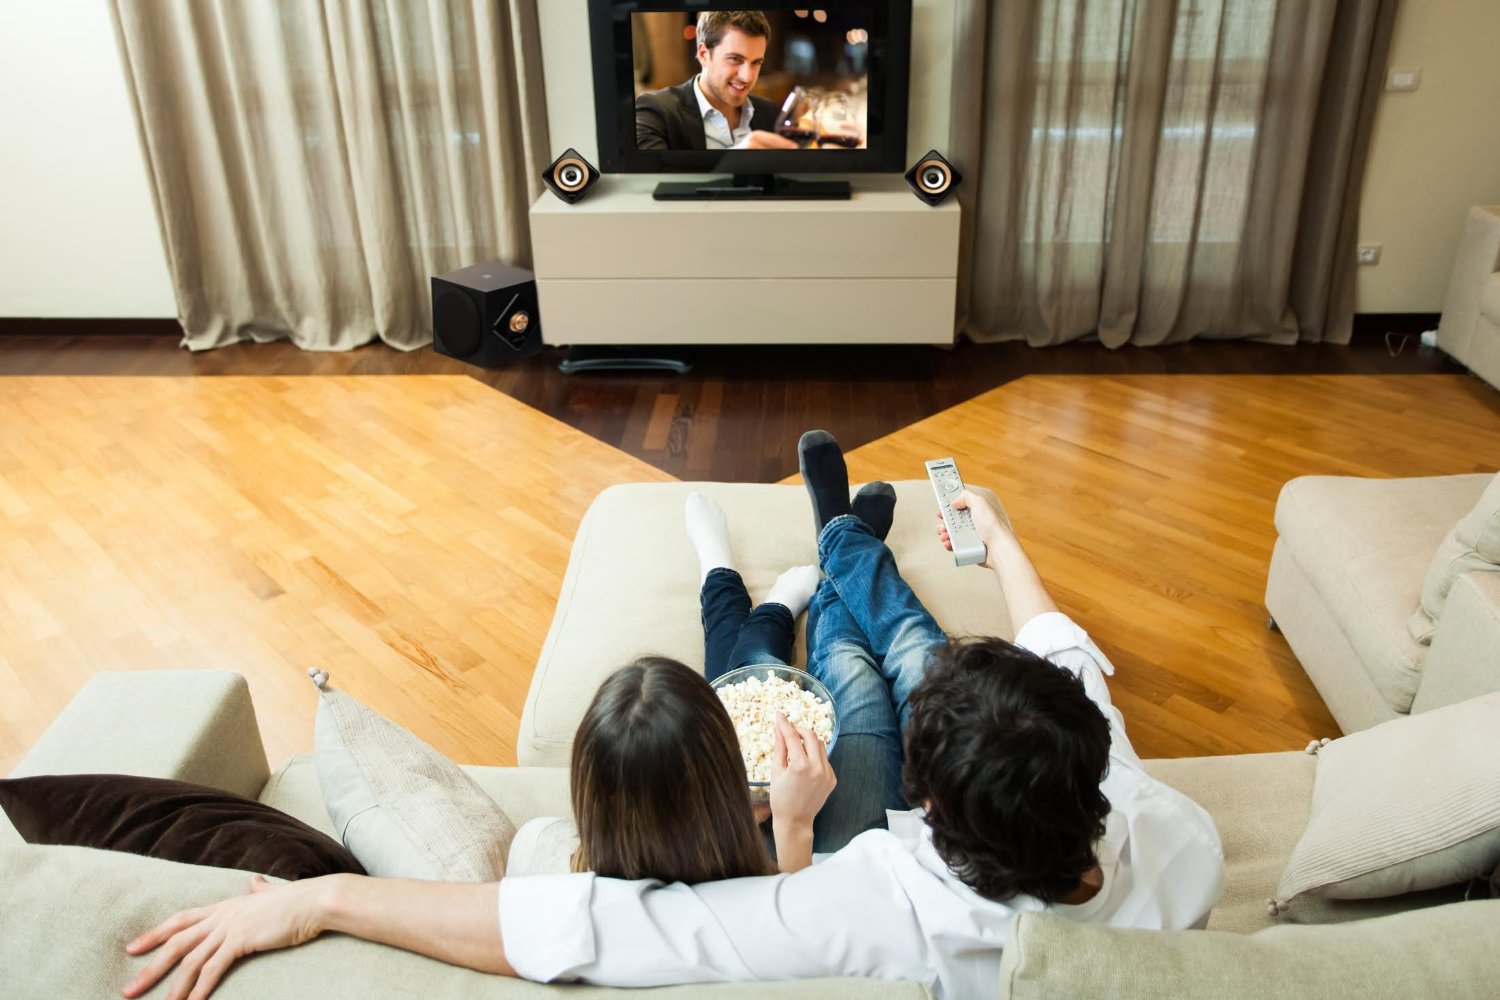 Study: Over 14 Million Pay-TV Subscribers Are Unhappy with What They Pay